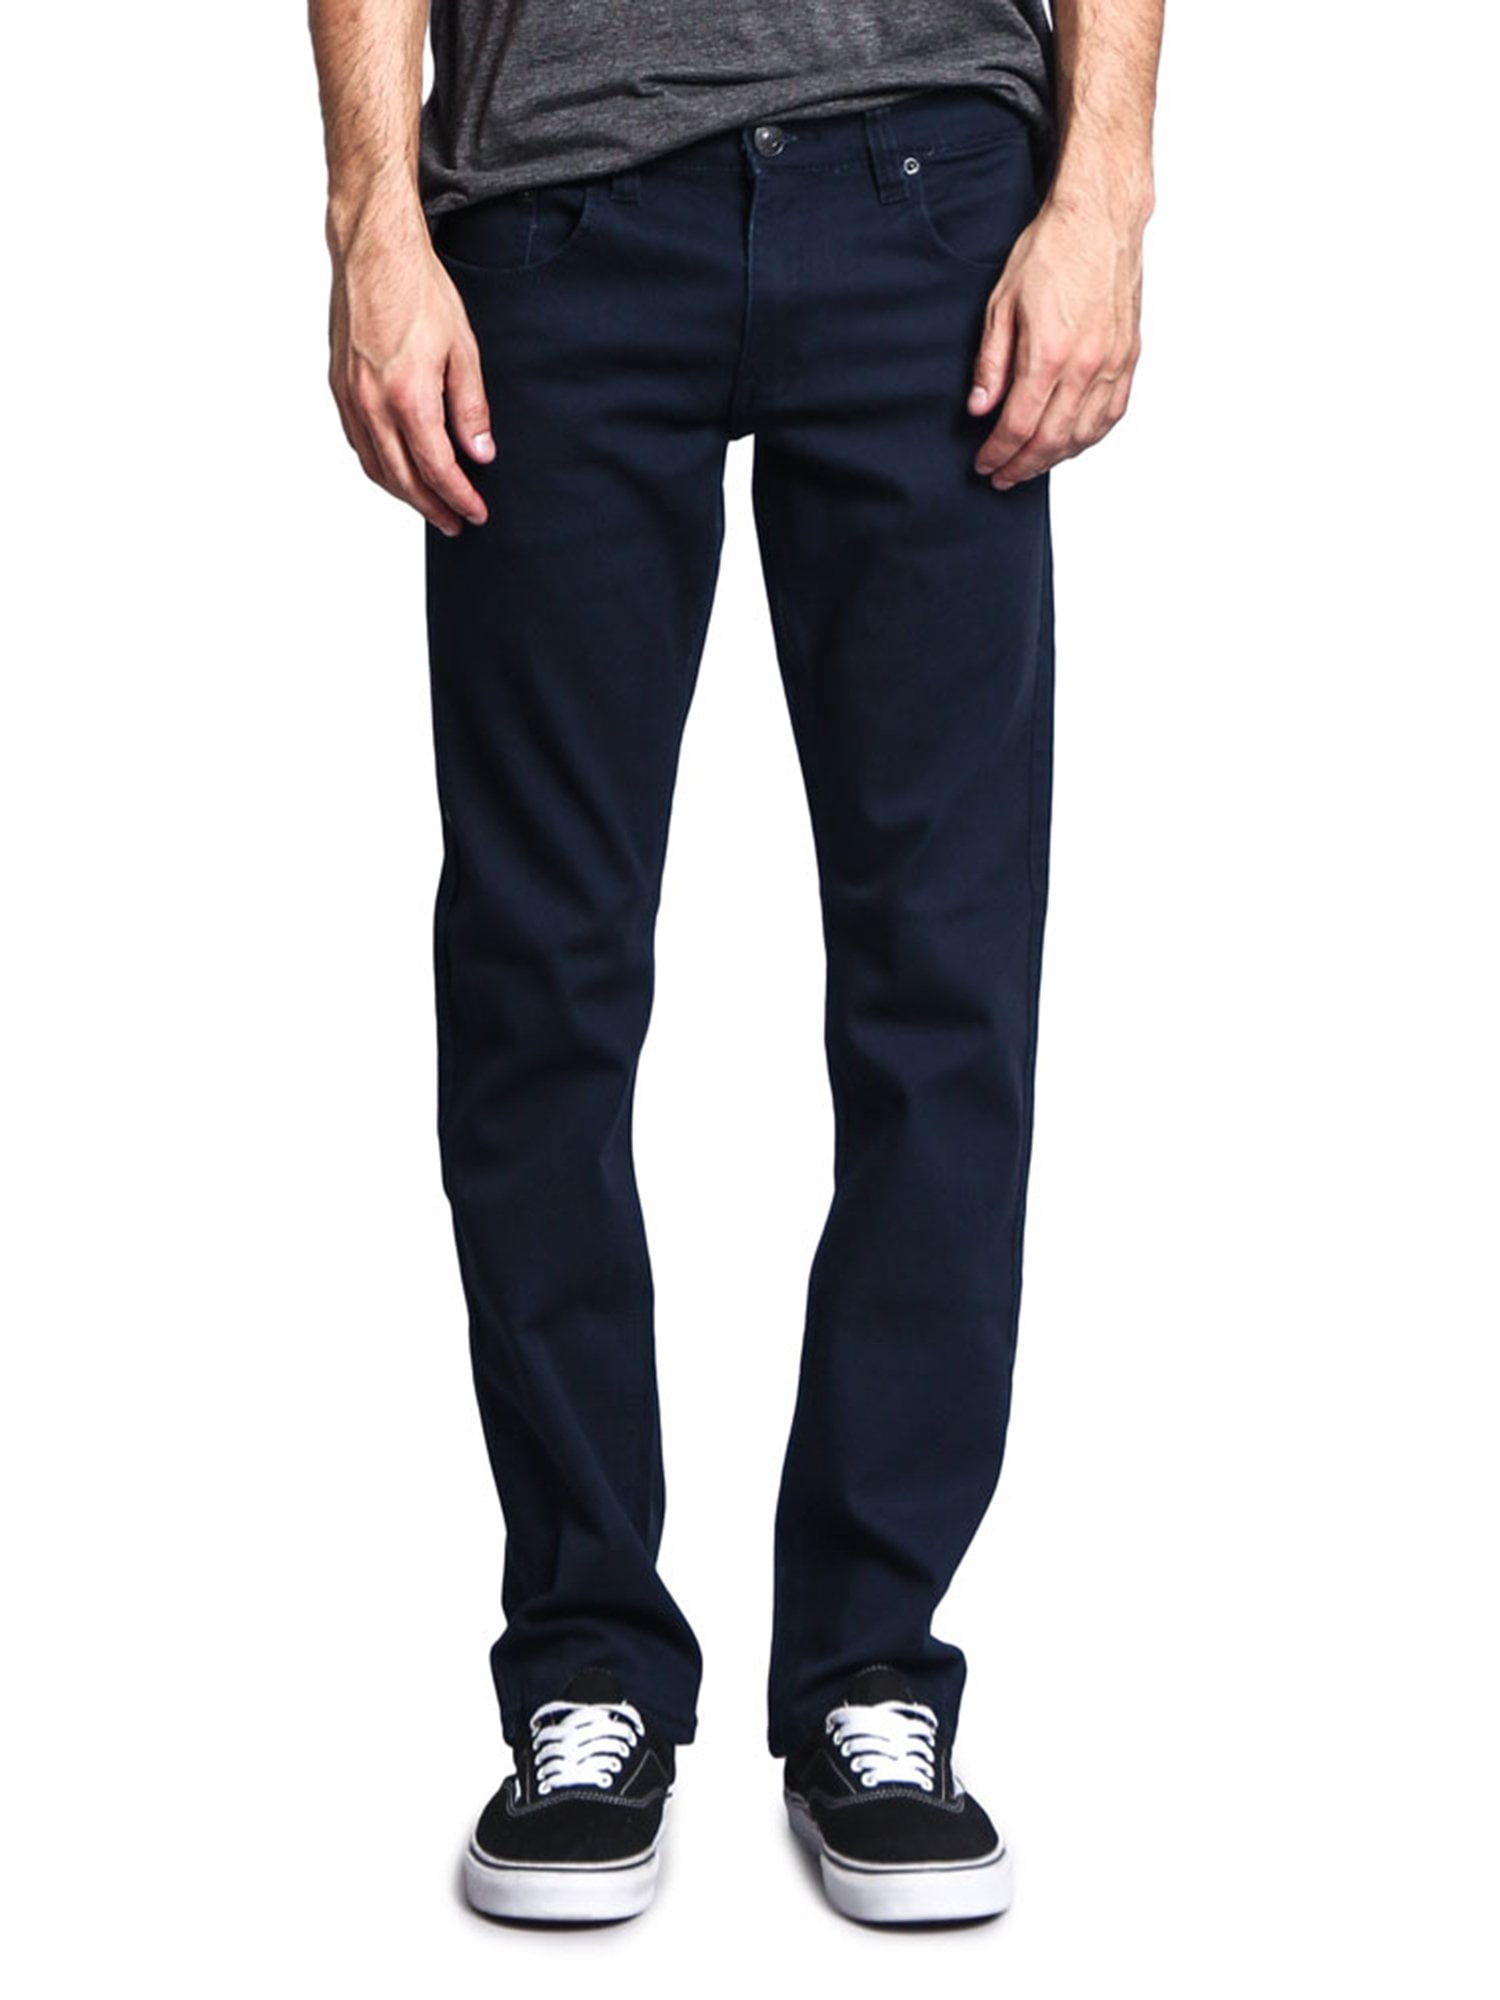 Victorious - Victorious Mens Slim Fit Colored Stretch Jeans GS21 - NAVY ...